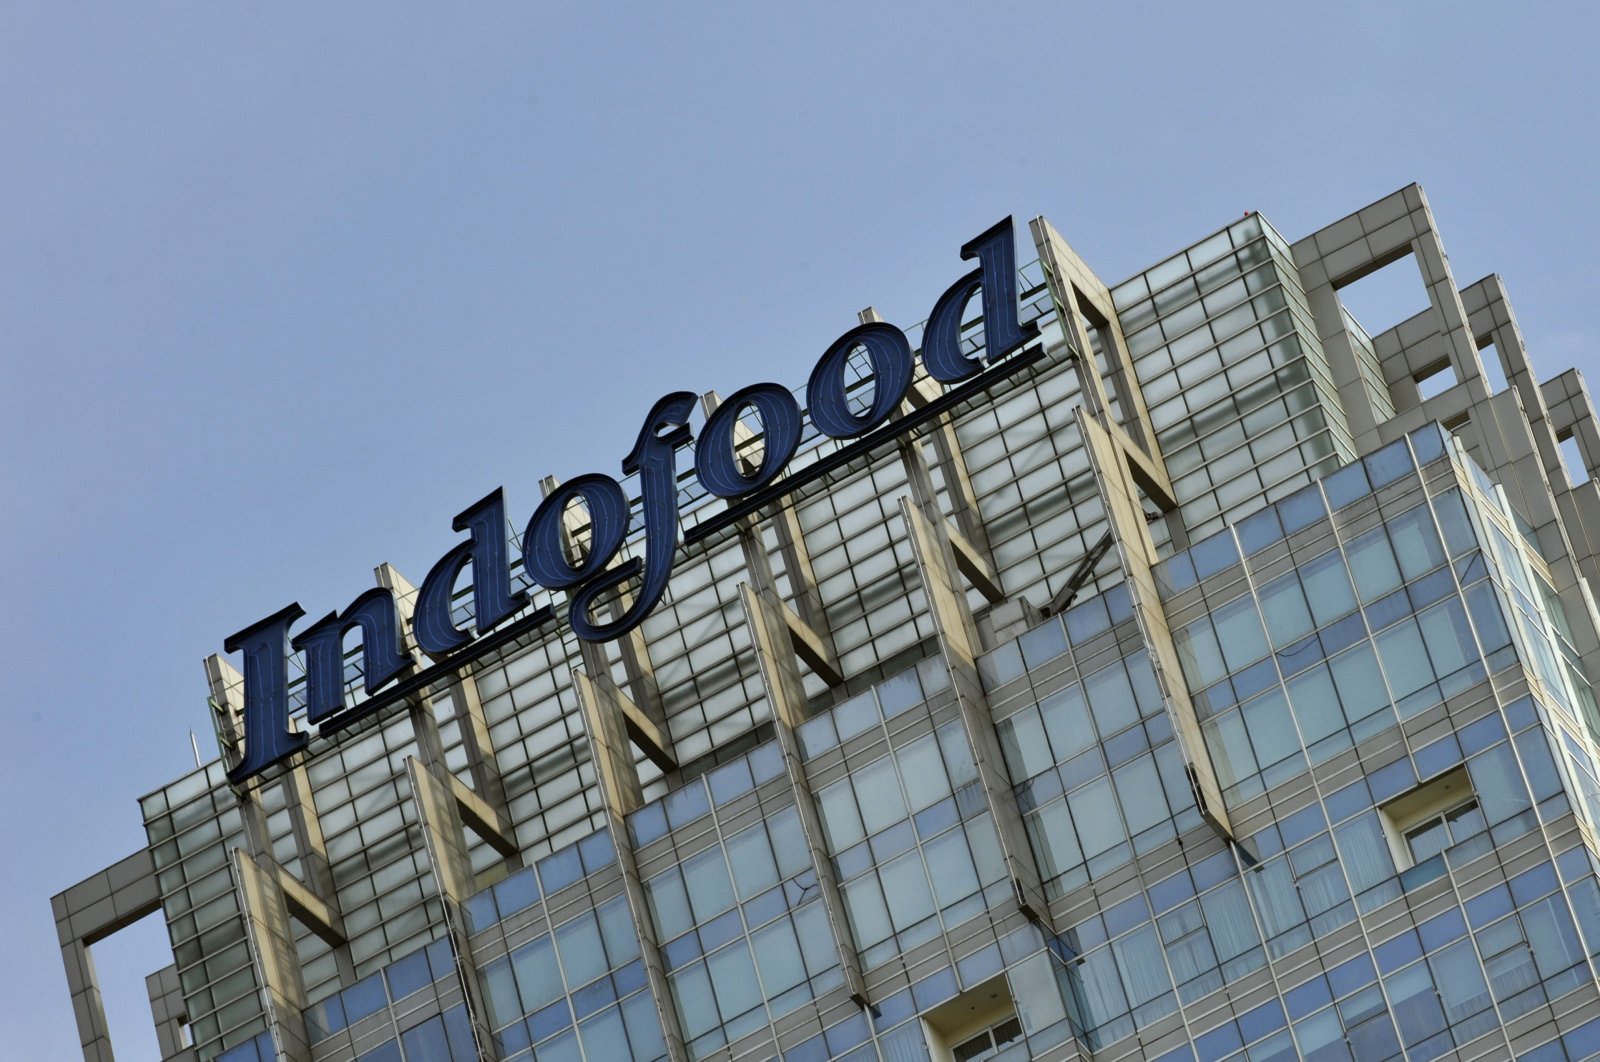 The logo of the head office of Indofood is seen in Jakarta, Sept. 18, 2010. (AFP Photo)